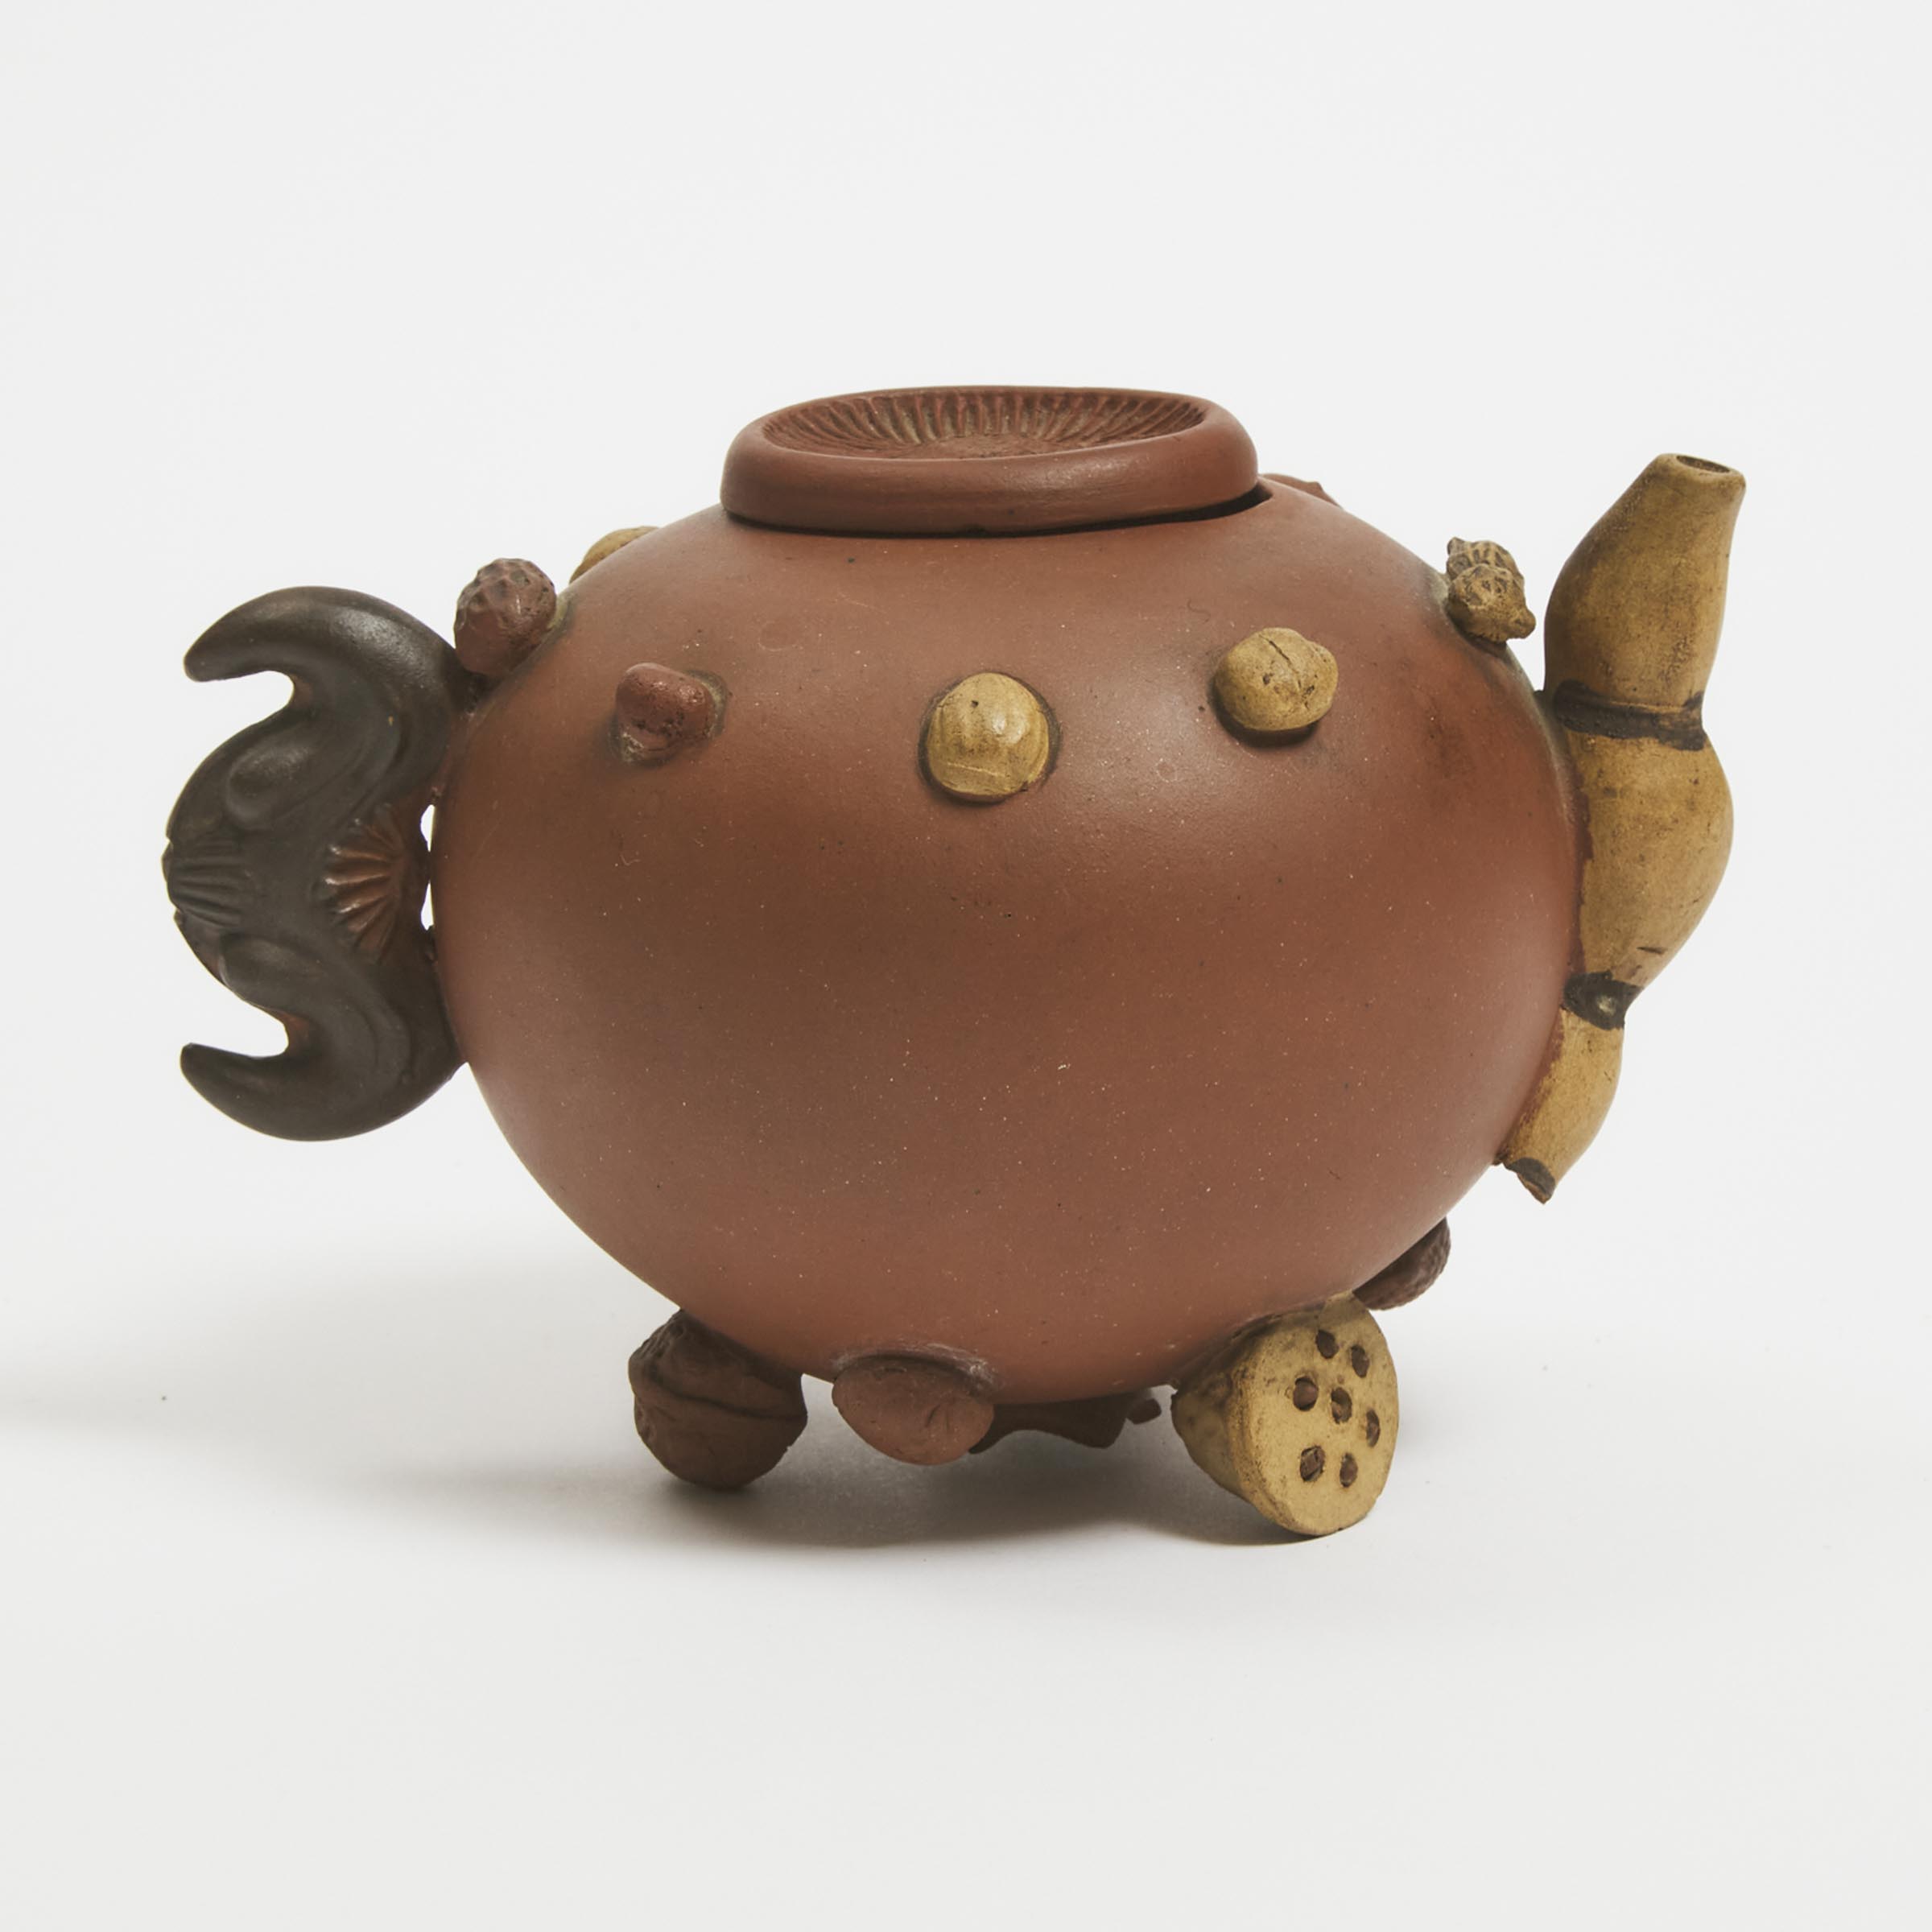 A Red Yixing/Zisha 'Nuts' Teapot With Panama Exposition Inscription, Dated 1915